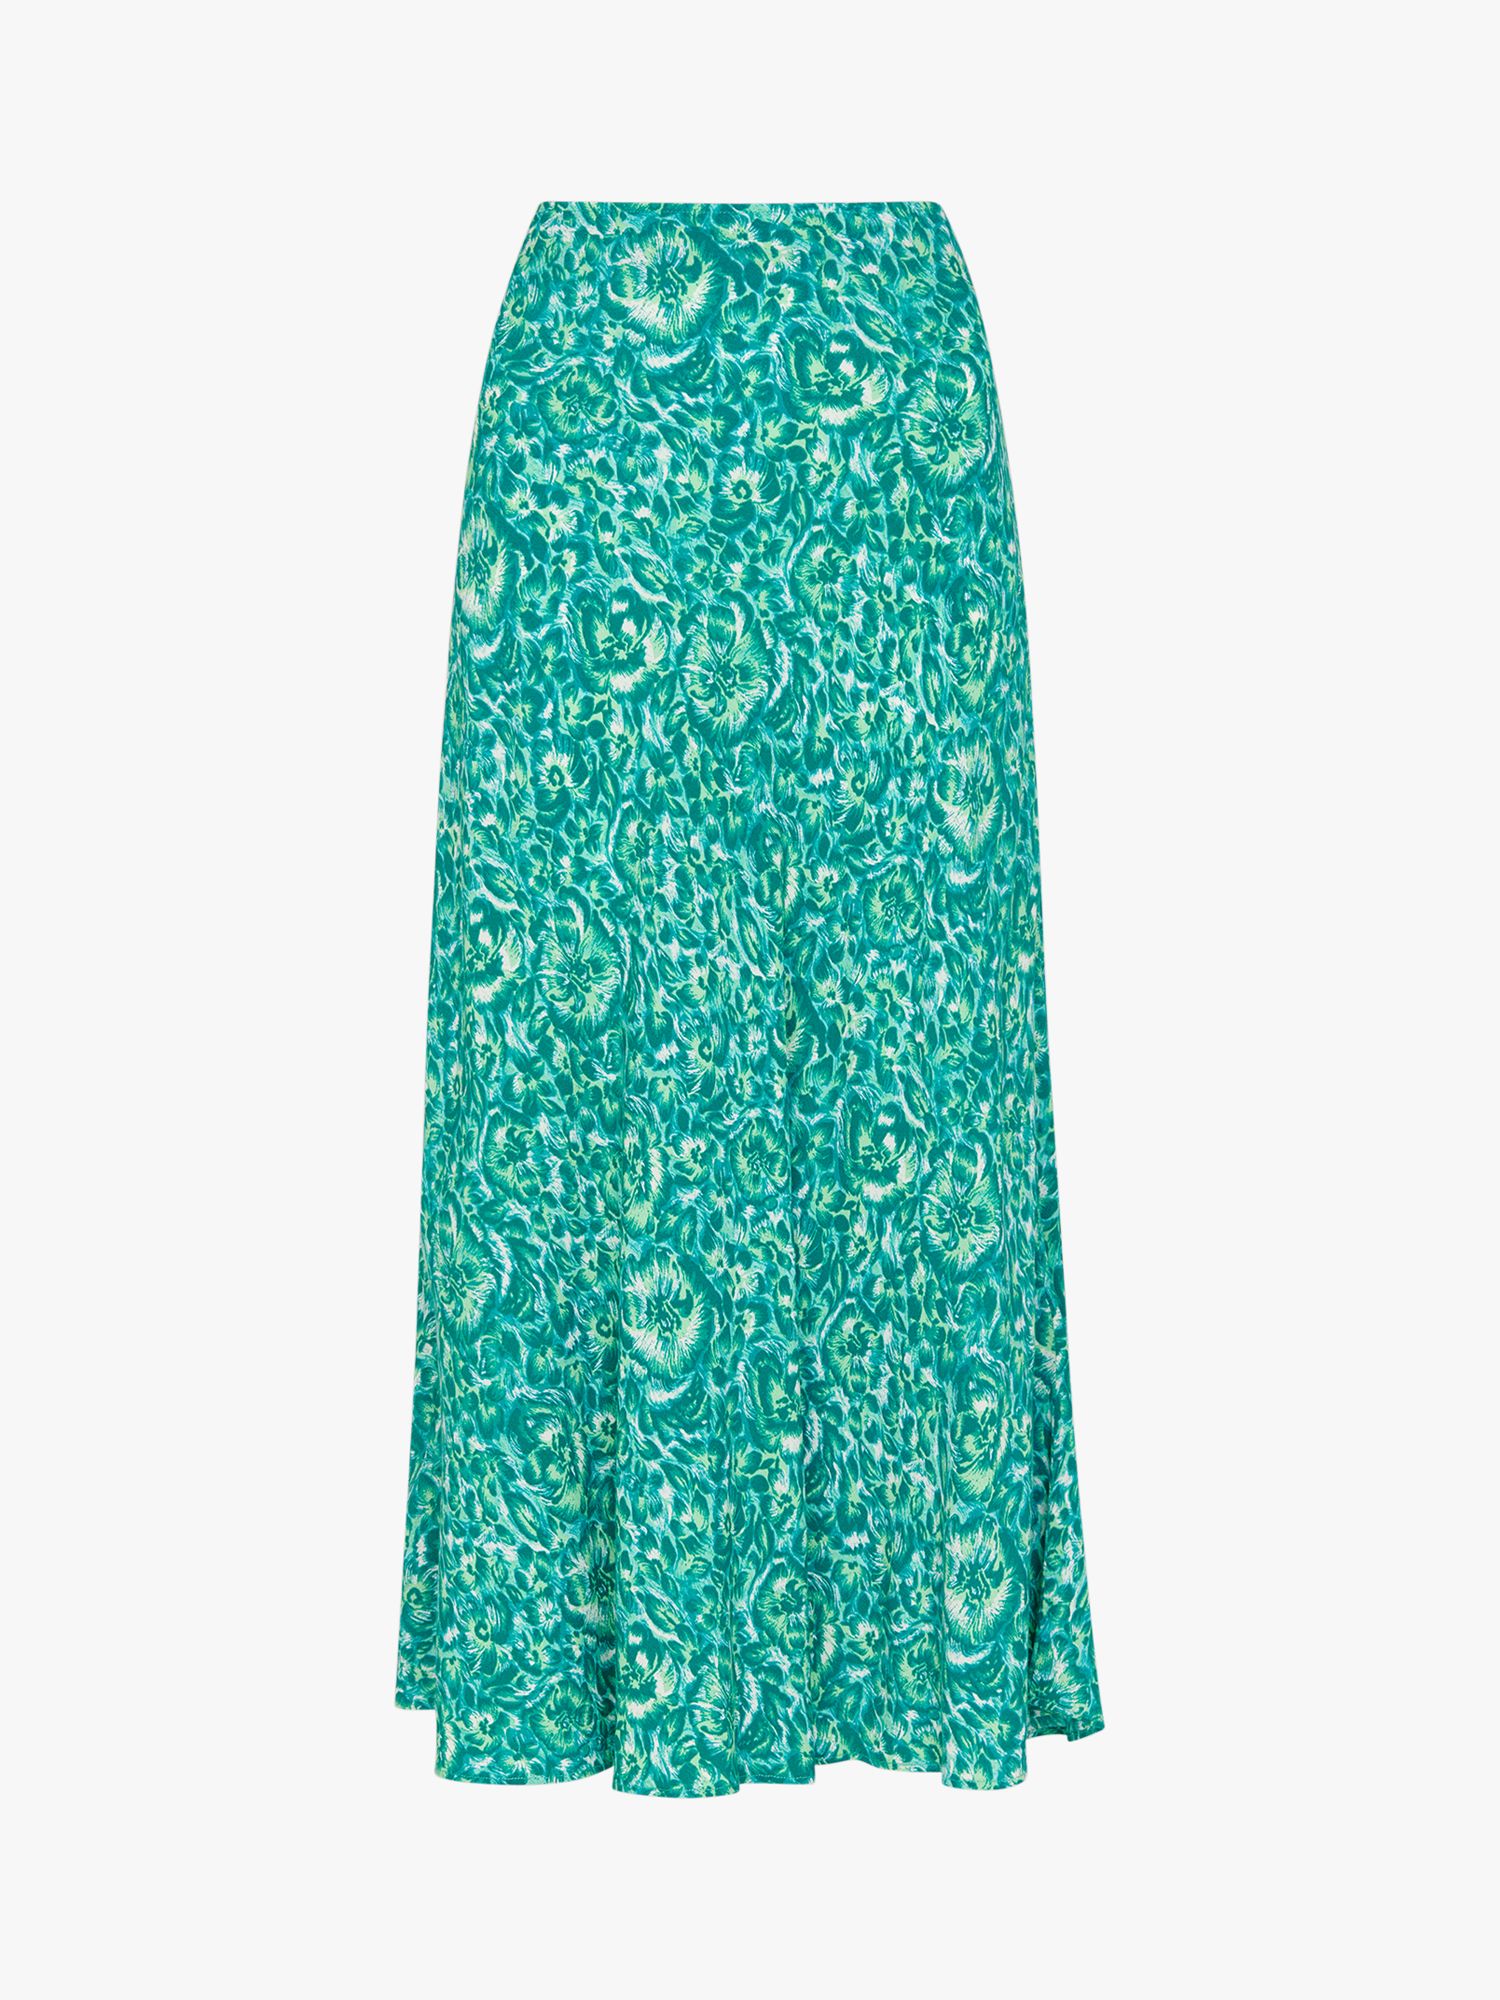 Whistles Clouded Floral Midi Skirt, Green/Multi at John Lewis & Partners